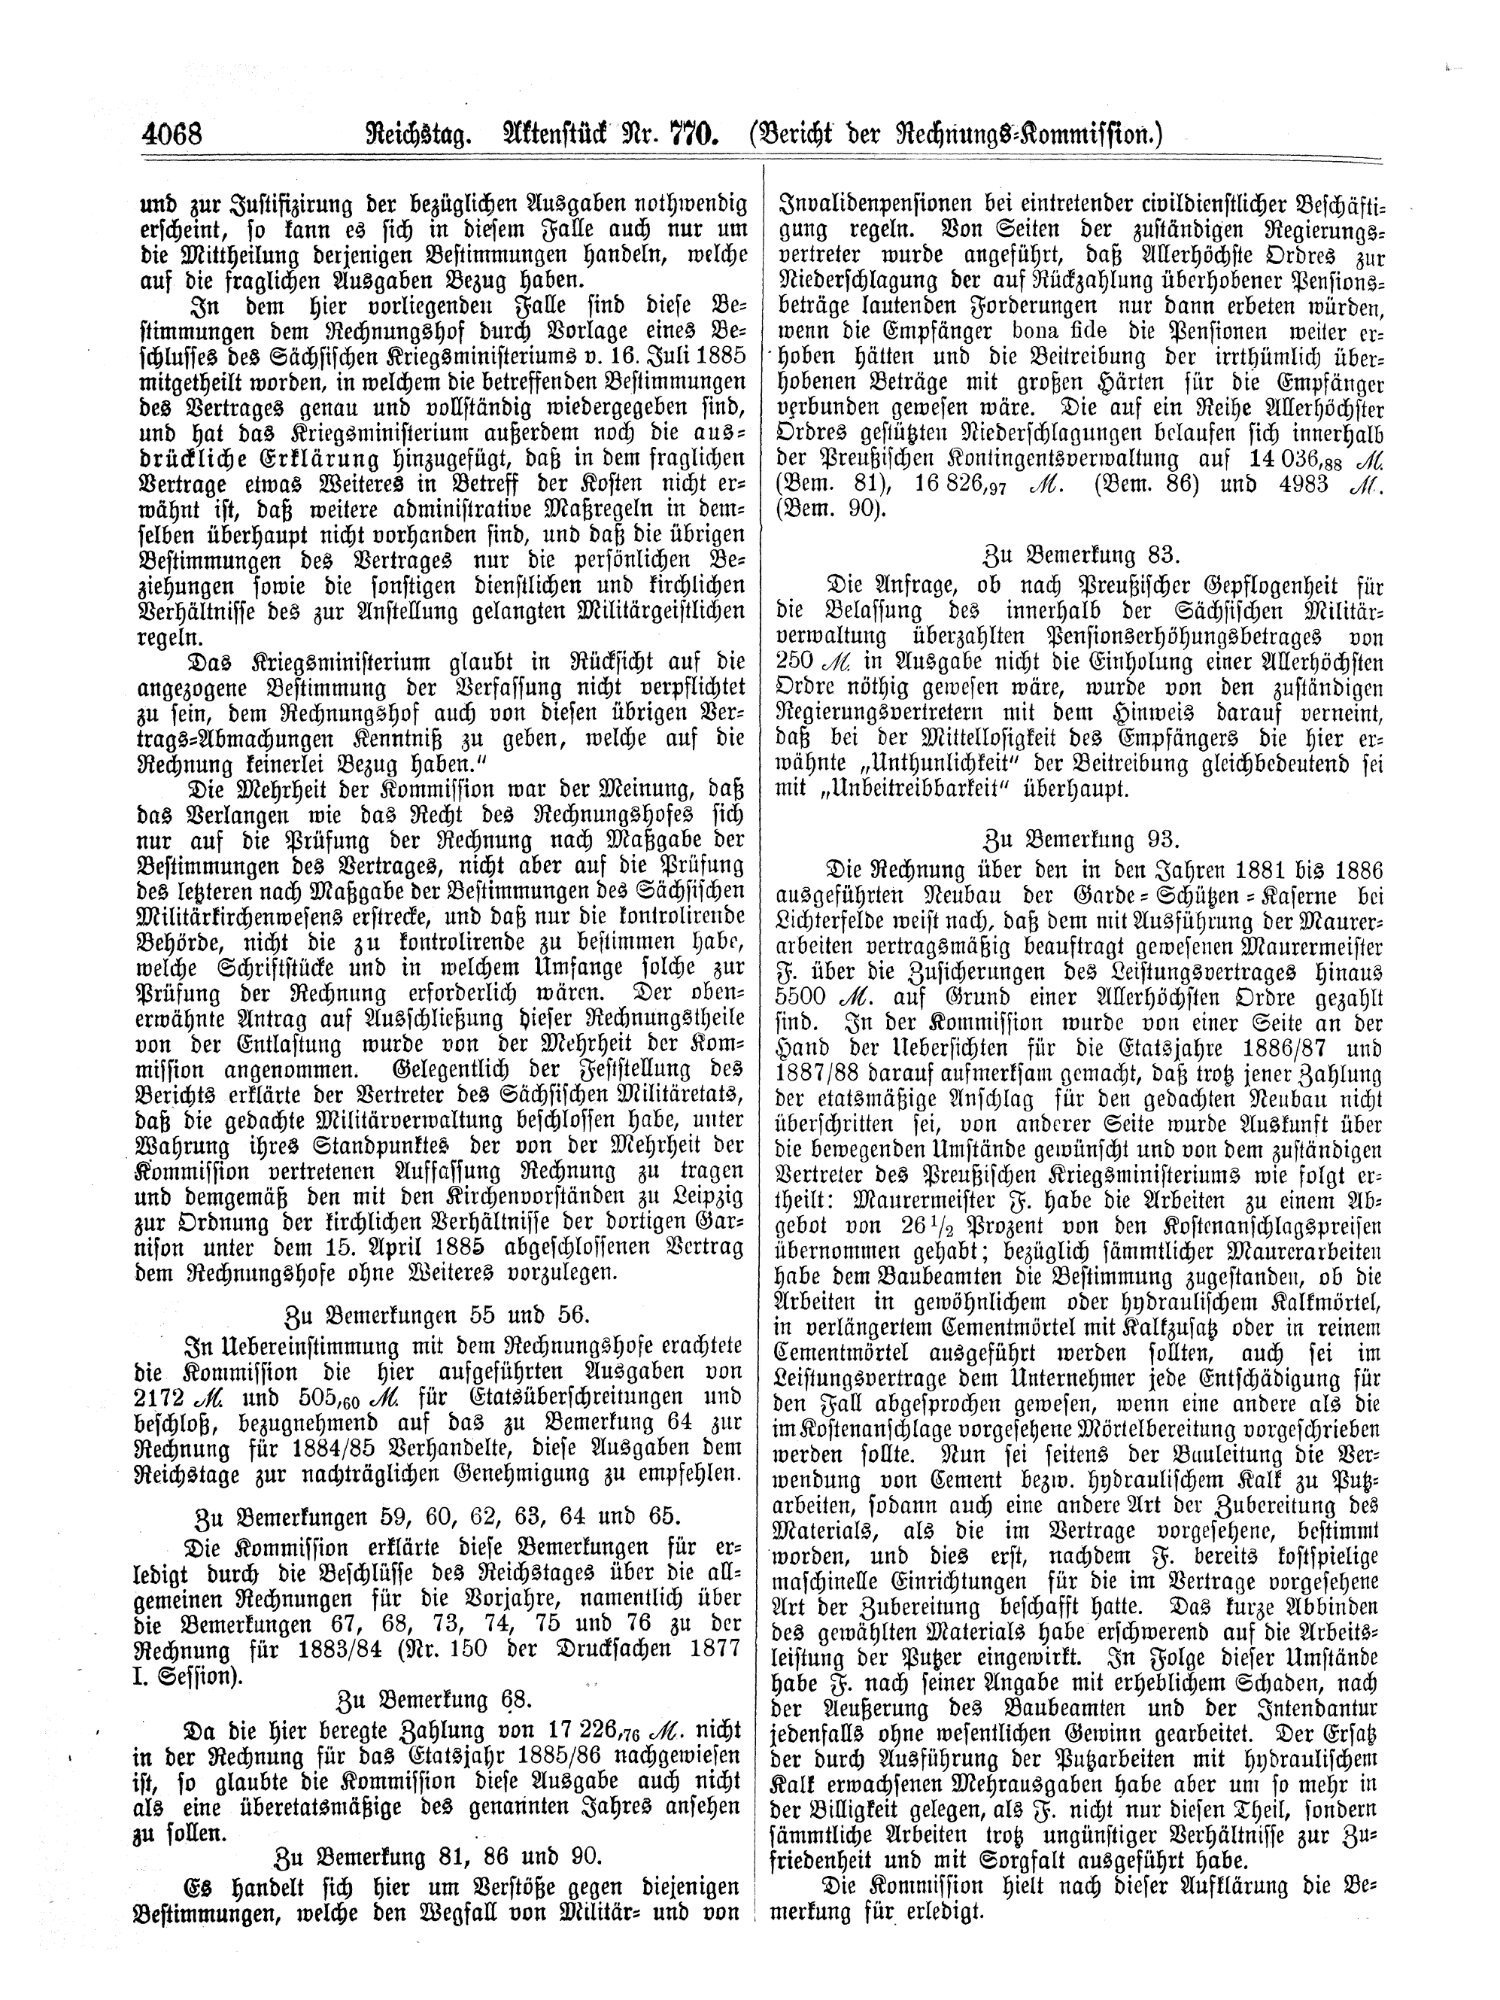 Scan of page 4068